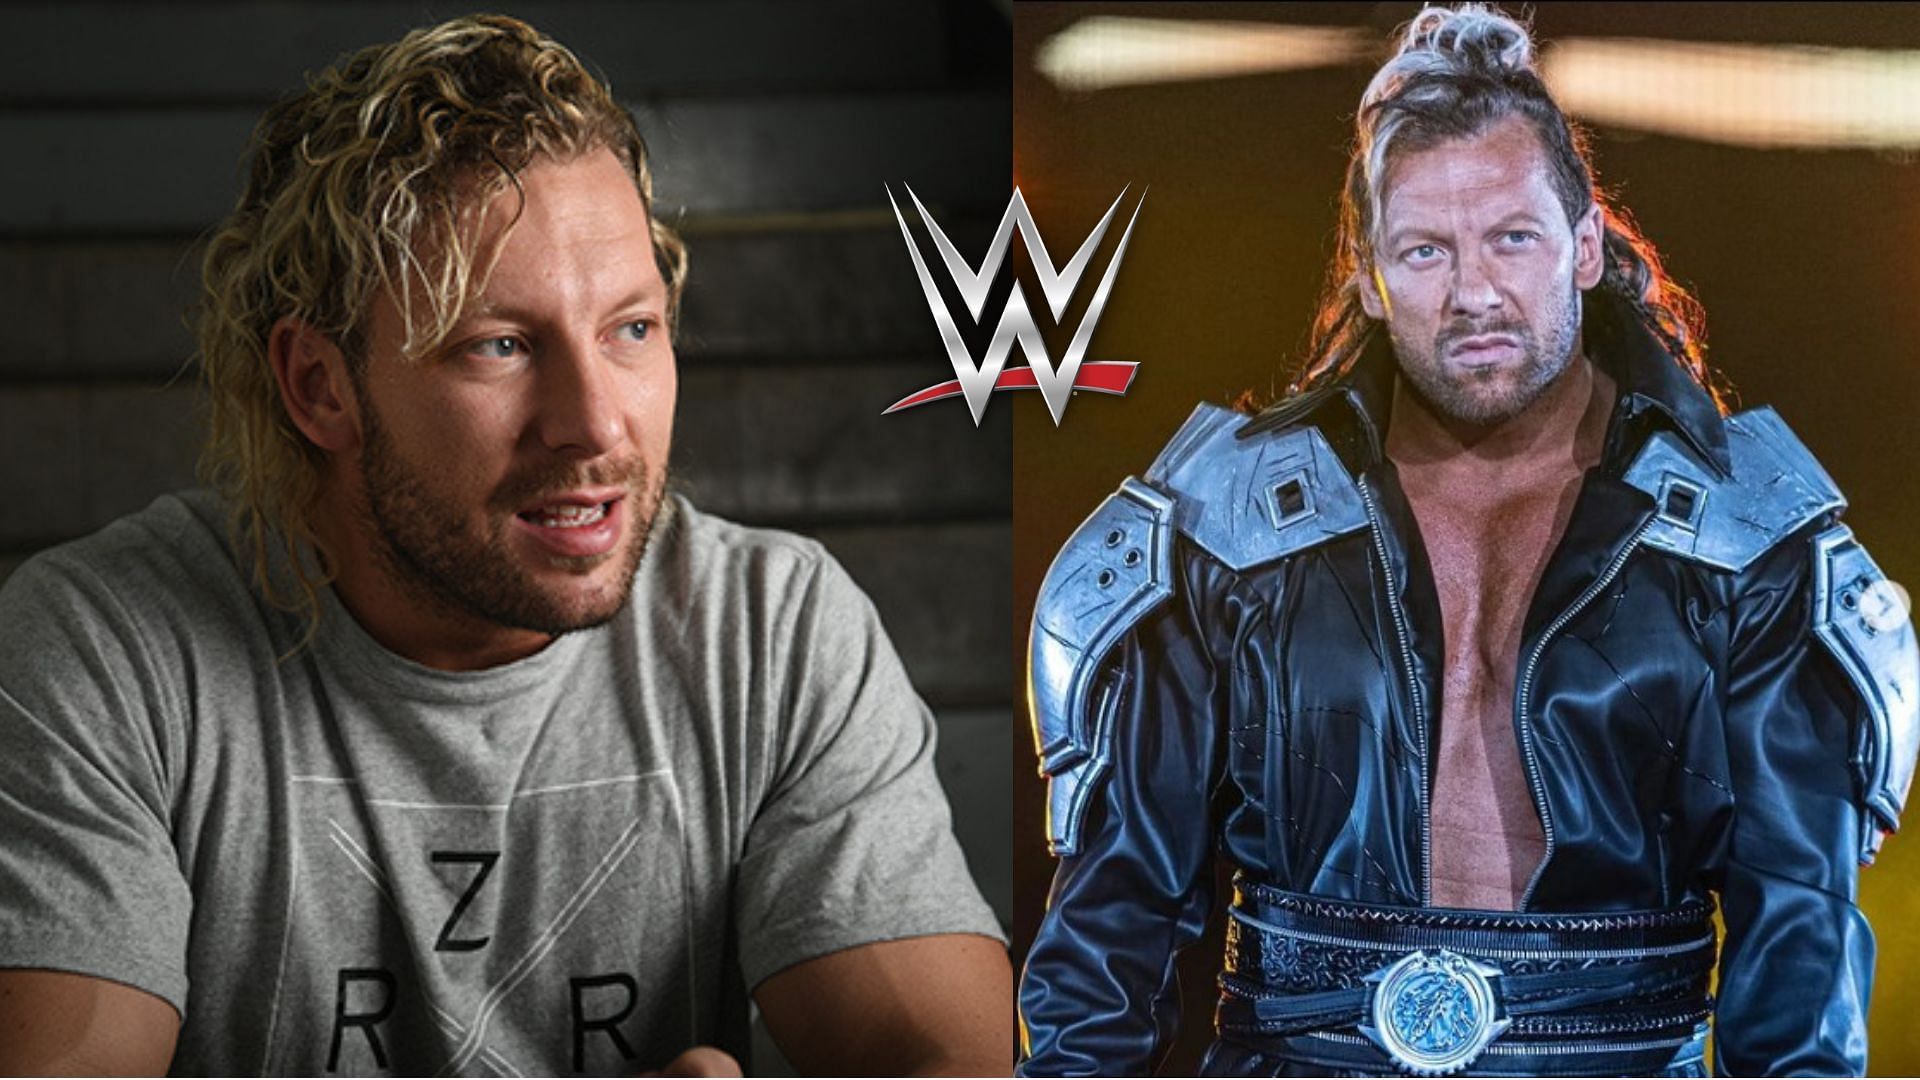 Kenny Omega teased a WWE debut with his attire